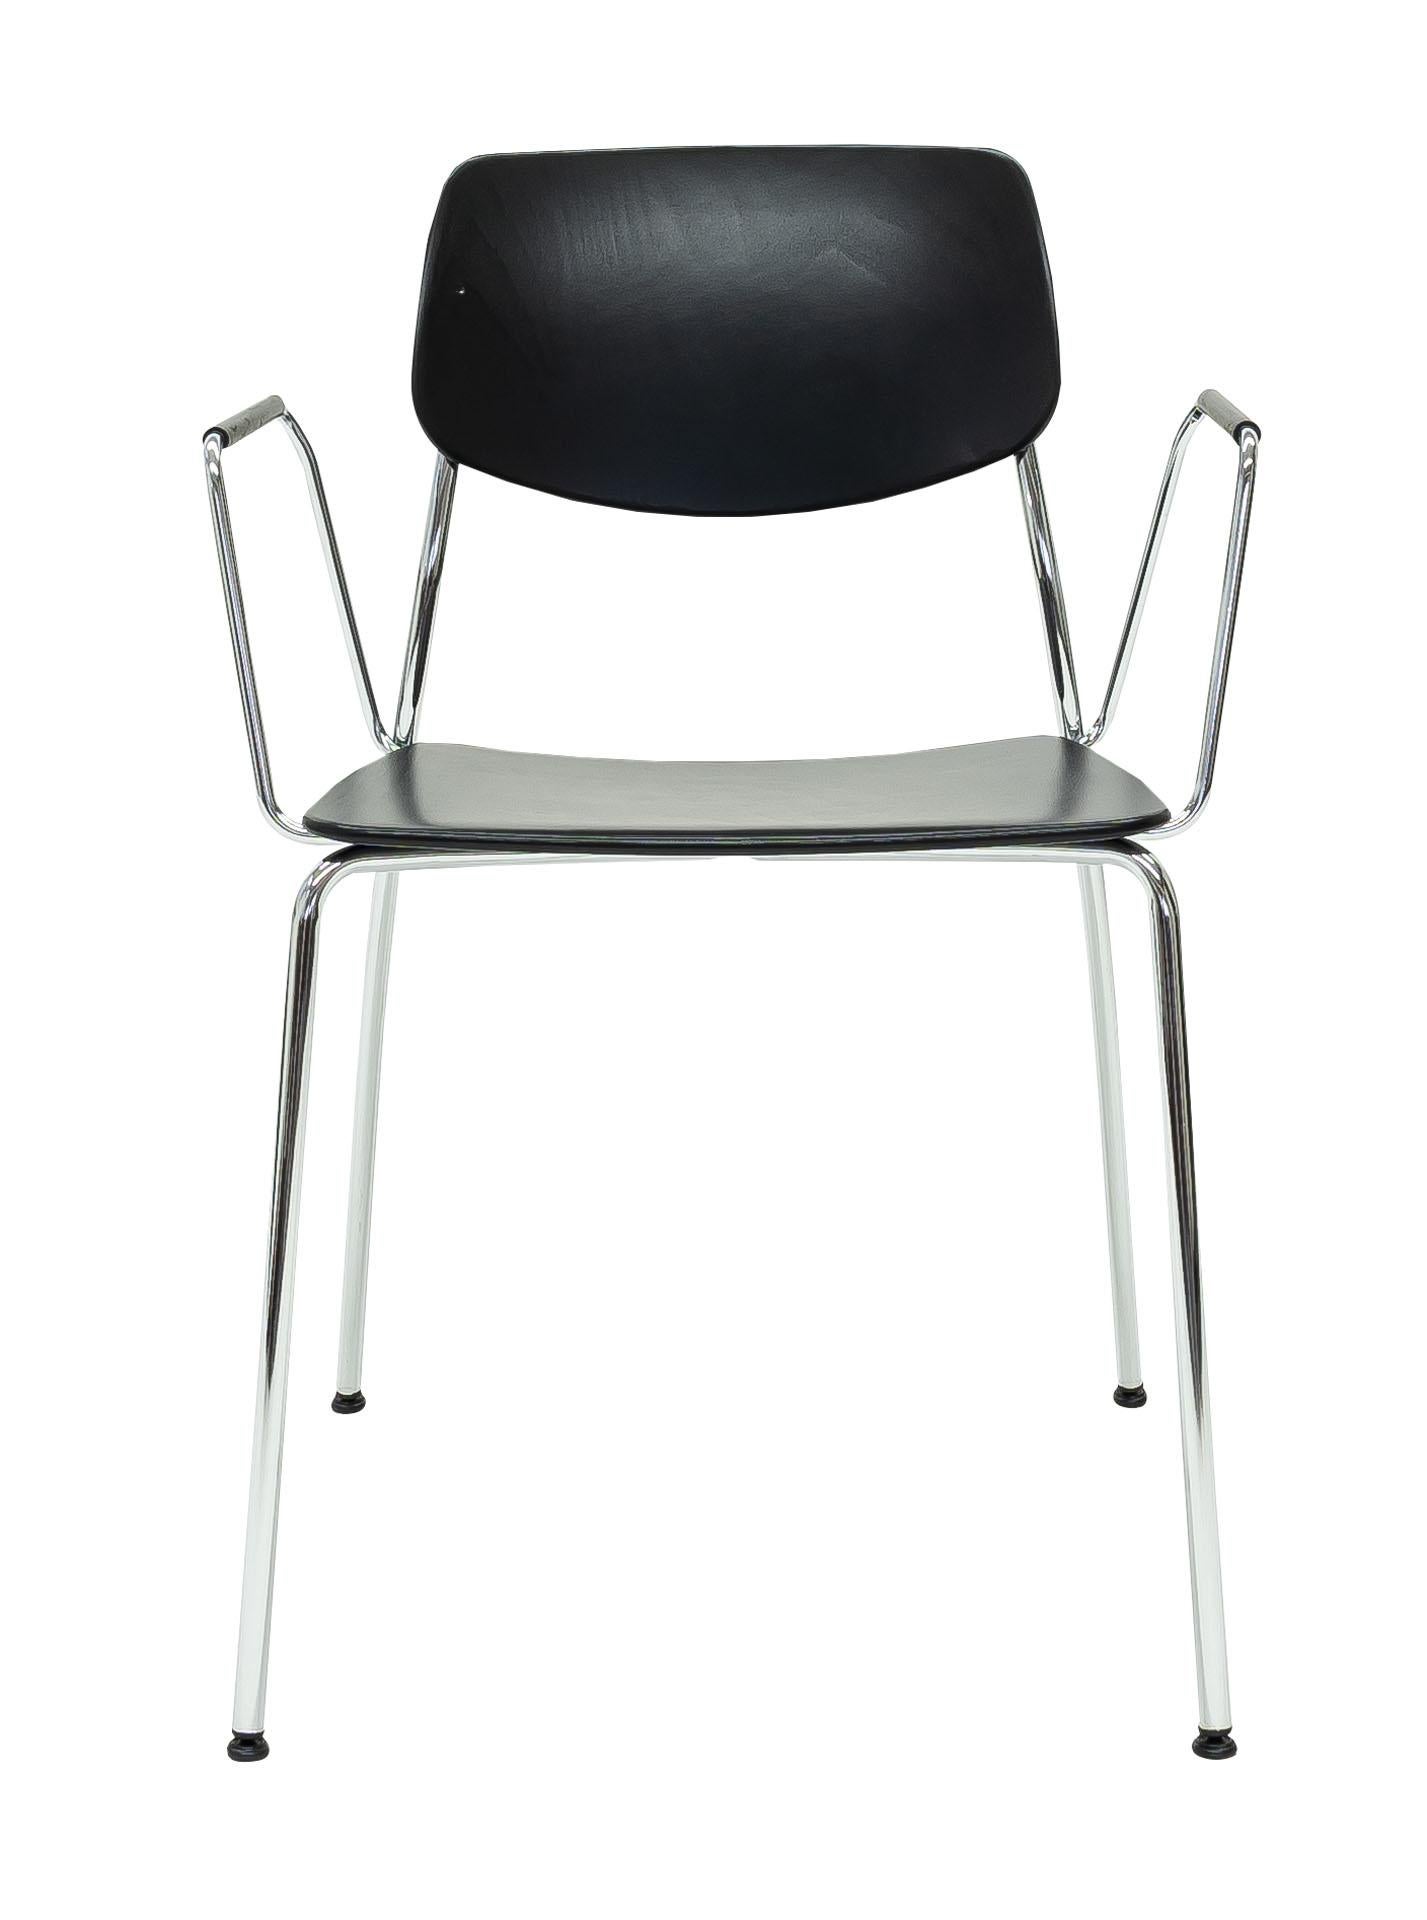 The Felber C14 is a reedition of a 1940s Classic Dietiker chair. The chair which was at first developed as a simple wooden chair in the early 40s, has been reengineered into a modular patented program.

The innovative concept of the Felber series is